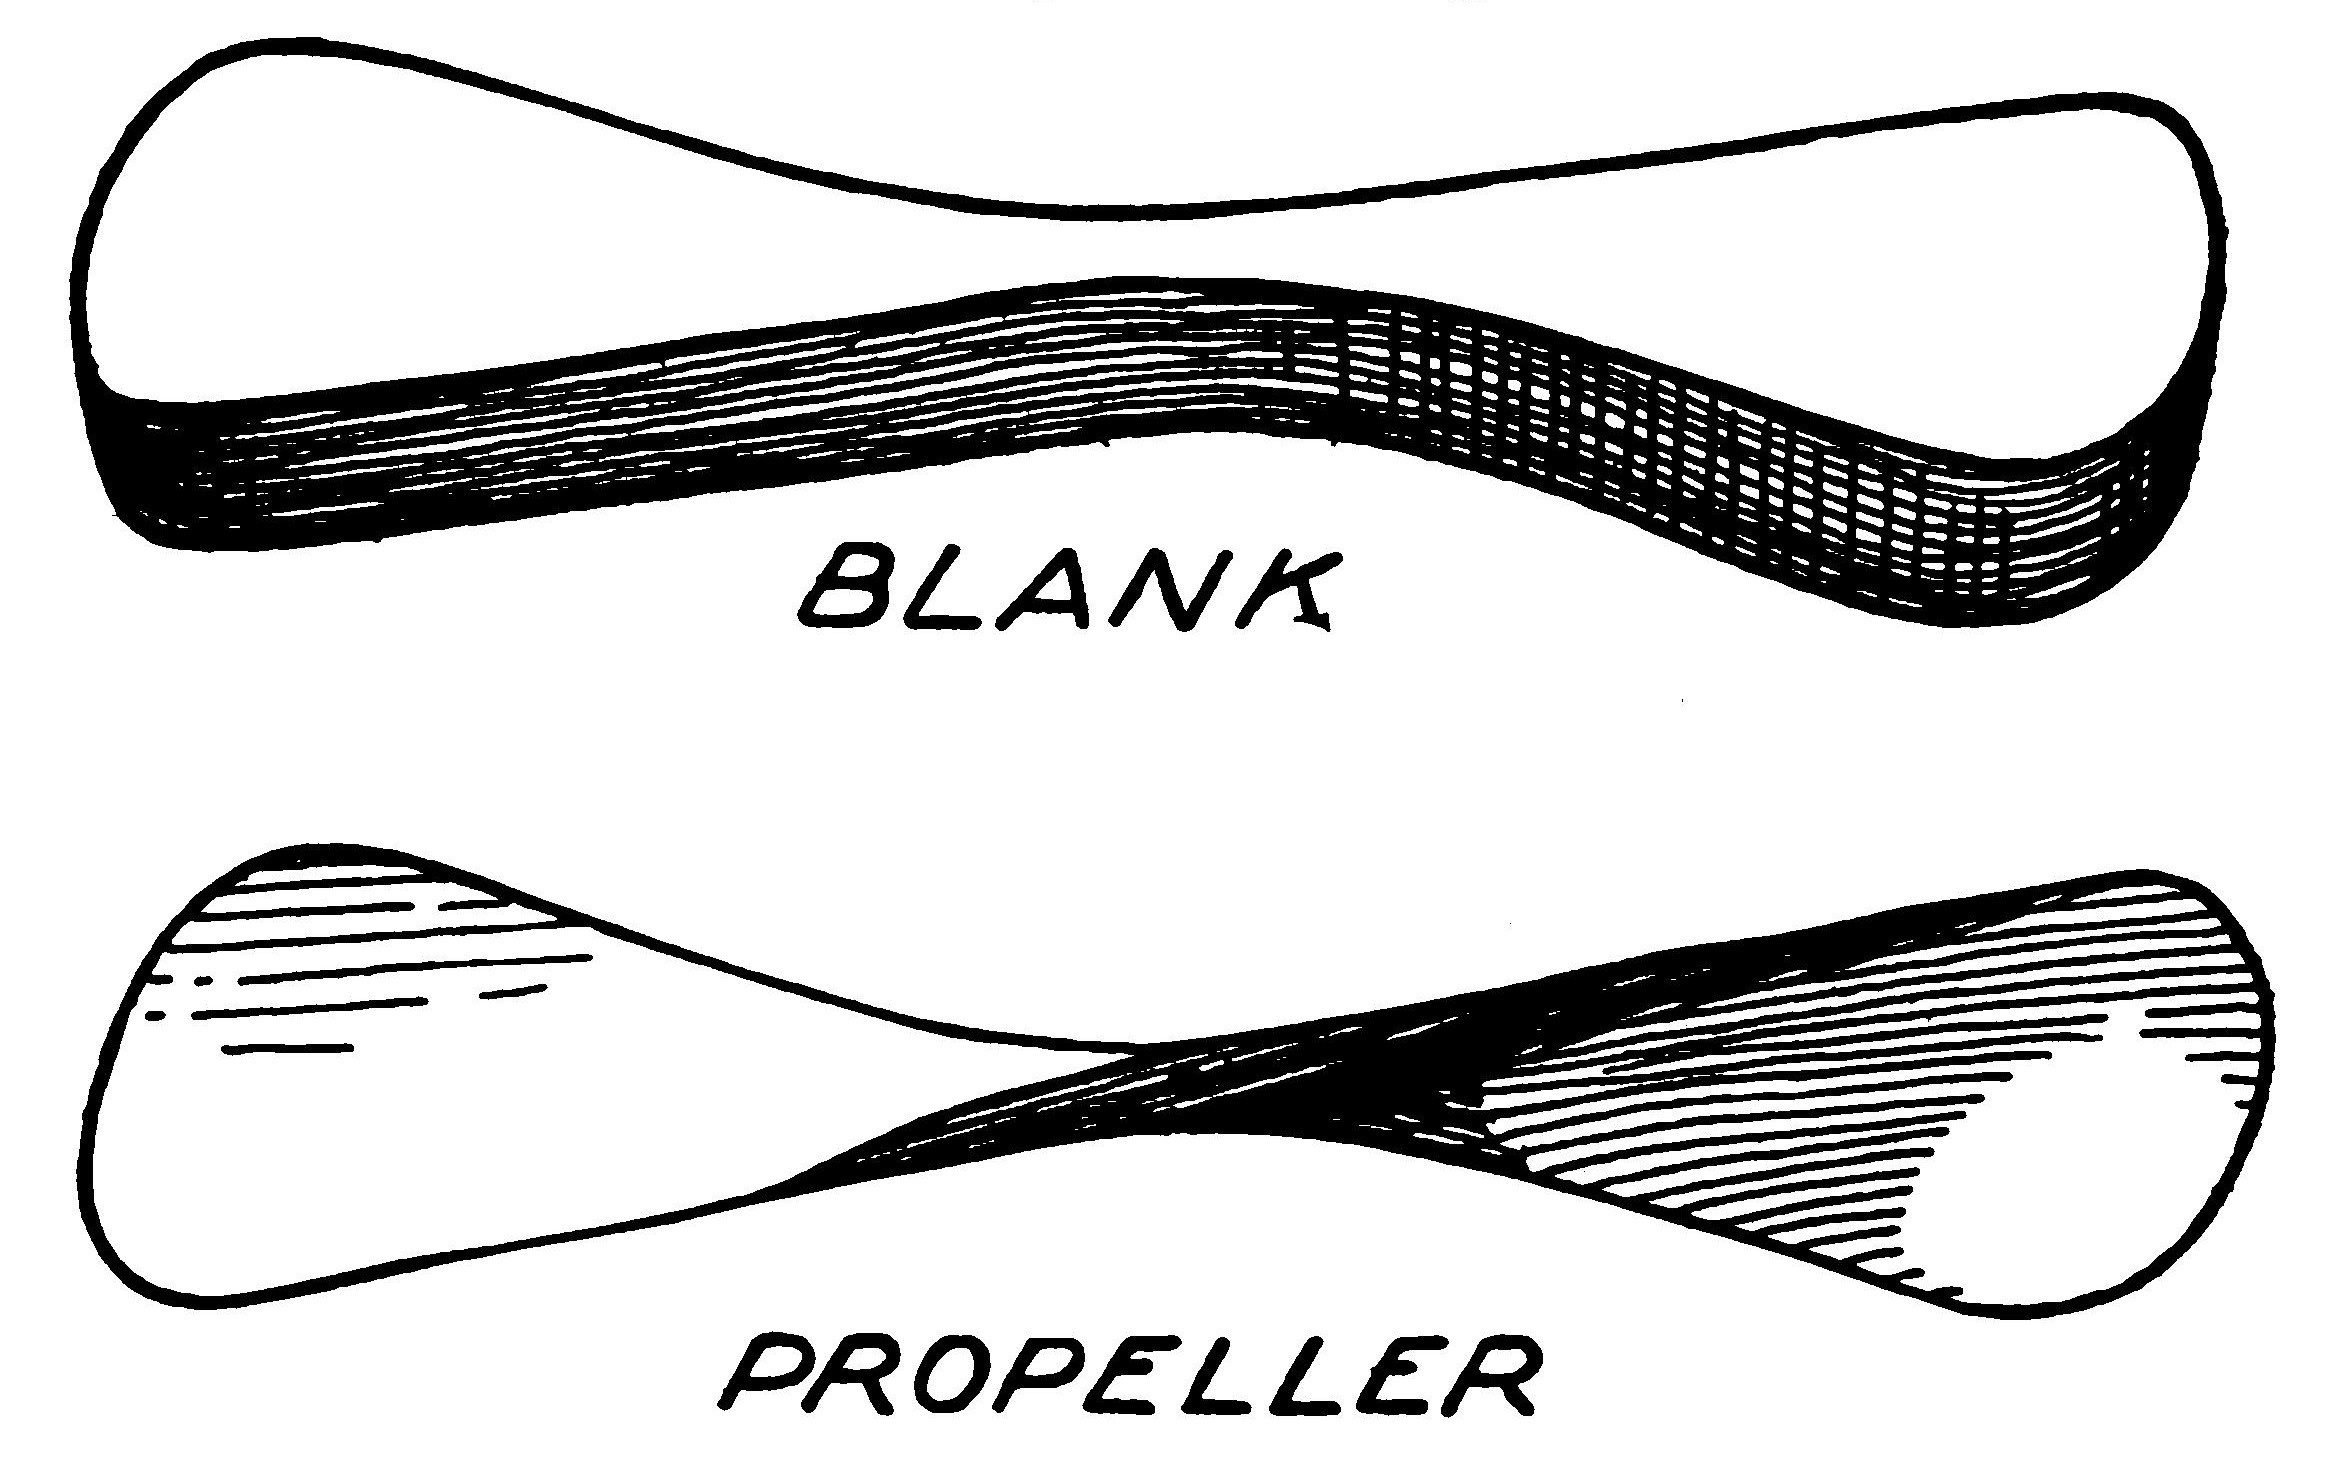 FIG. 55. Racing blank and propeller.